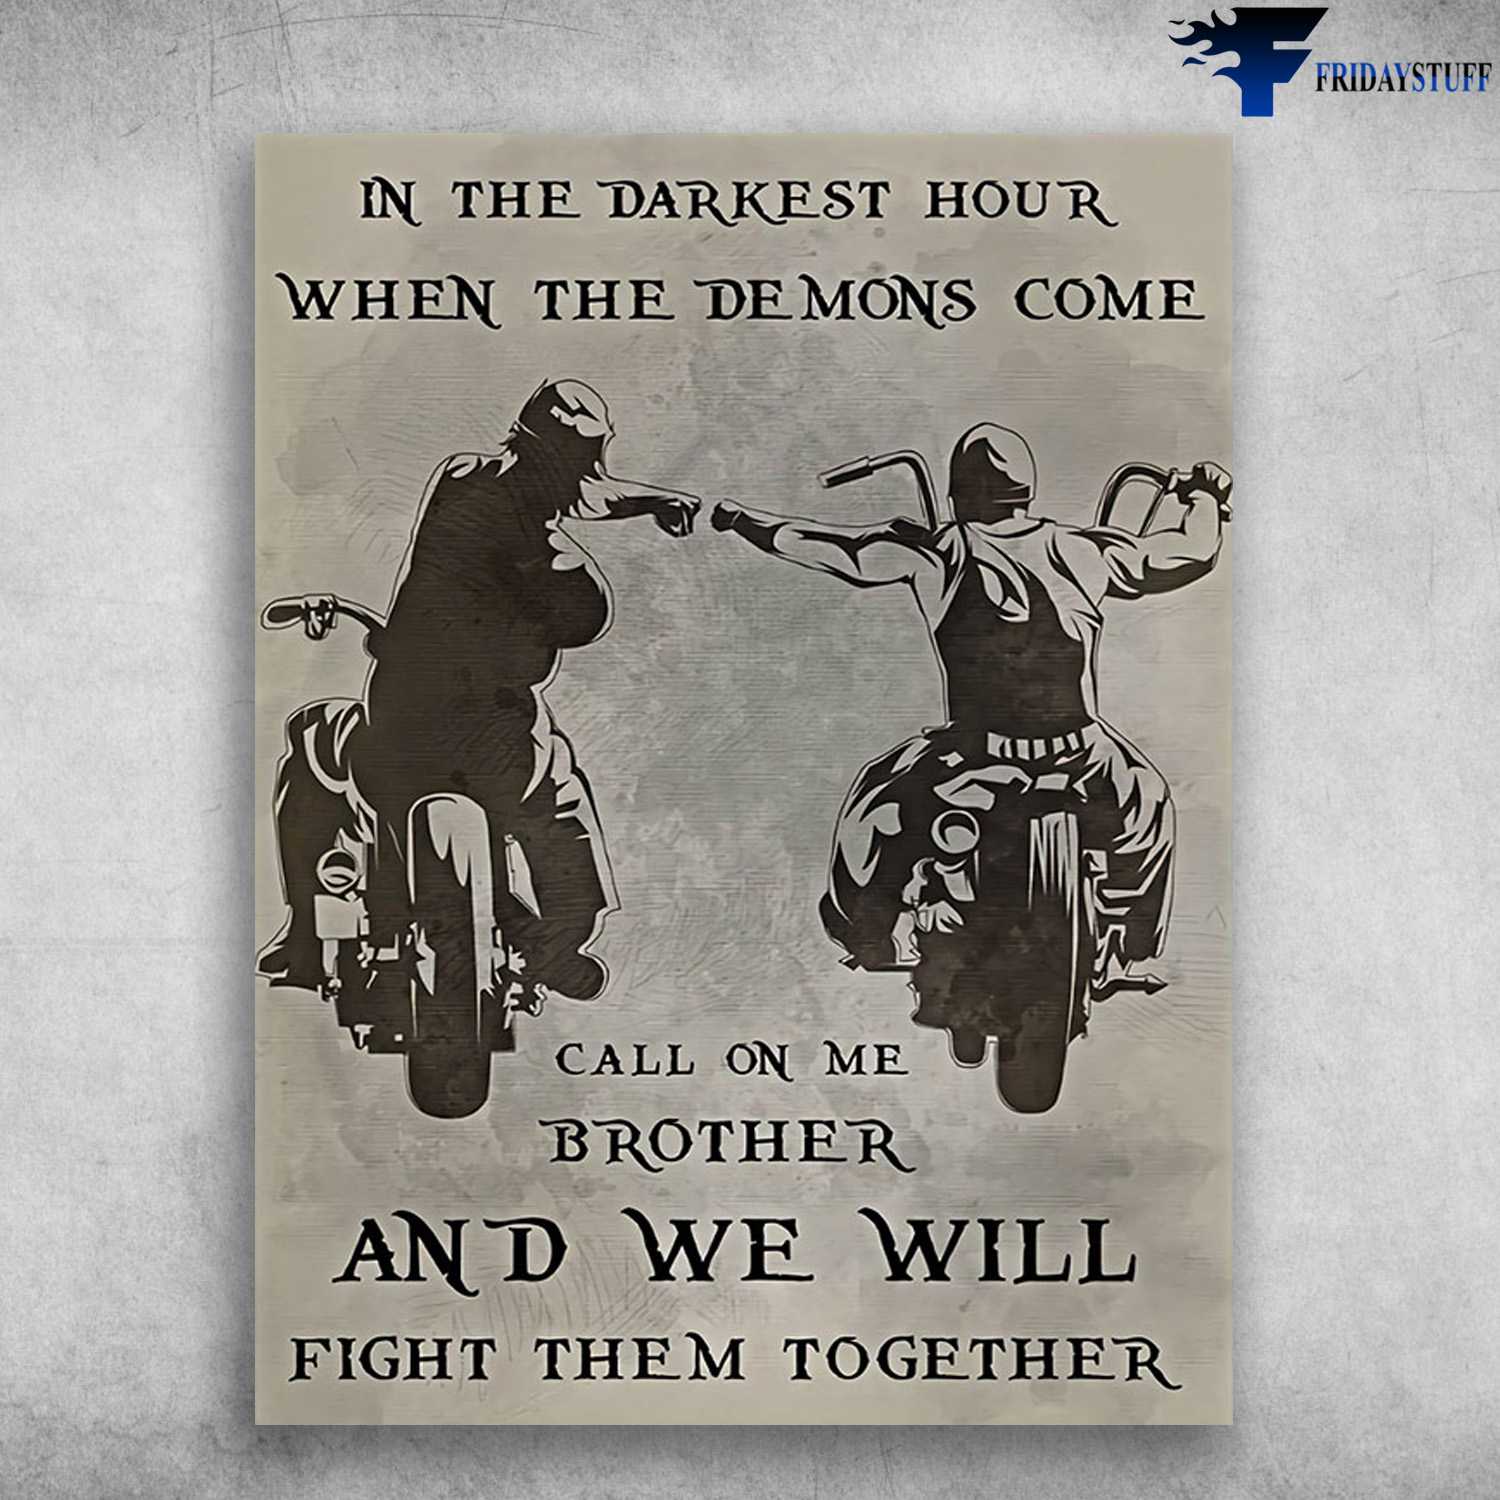 Motorcycle Man, Brother Poster - In The Darkest Hour, When The Demons Come, Call On Me Brother, And We Will, Fight Them Together